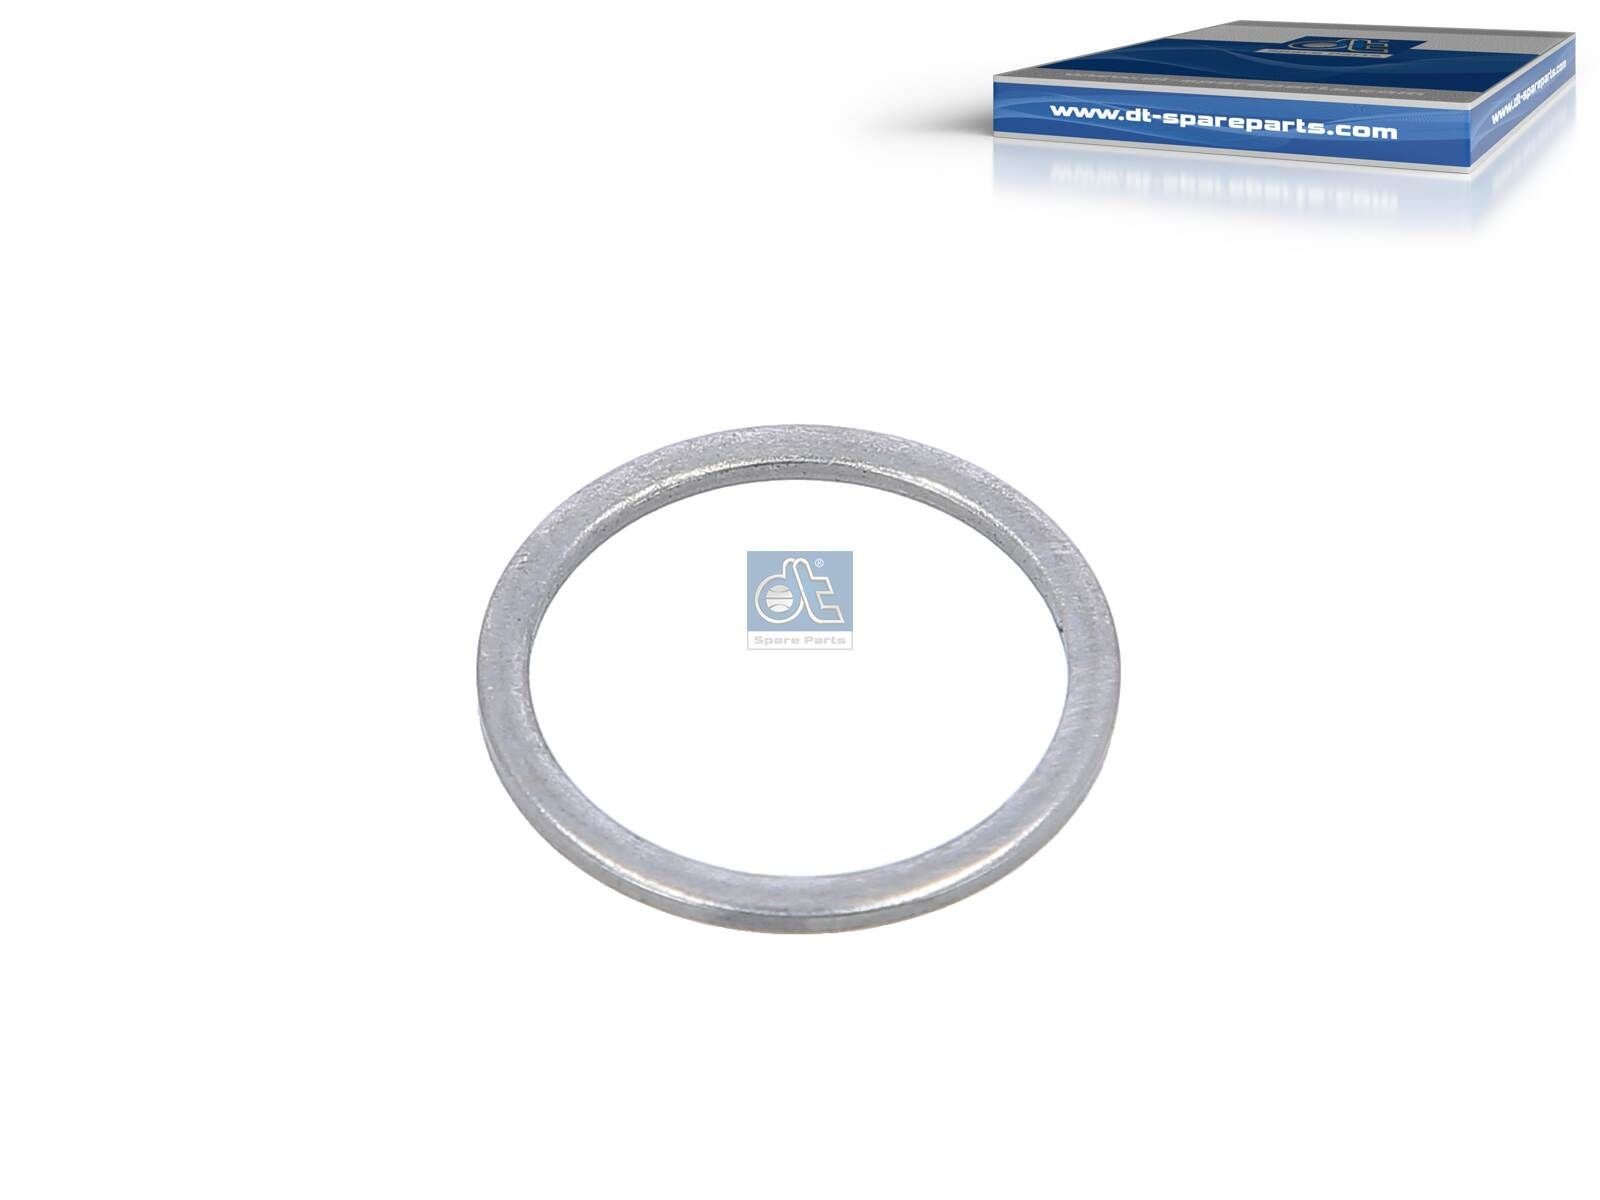 DT Spare Parts 9.01036 Seal Ring 007 603 02 21 03